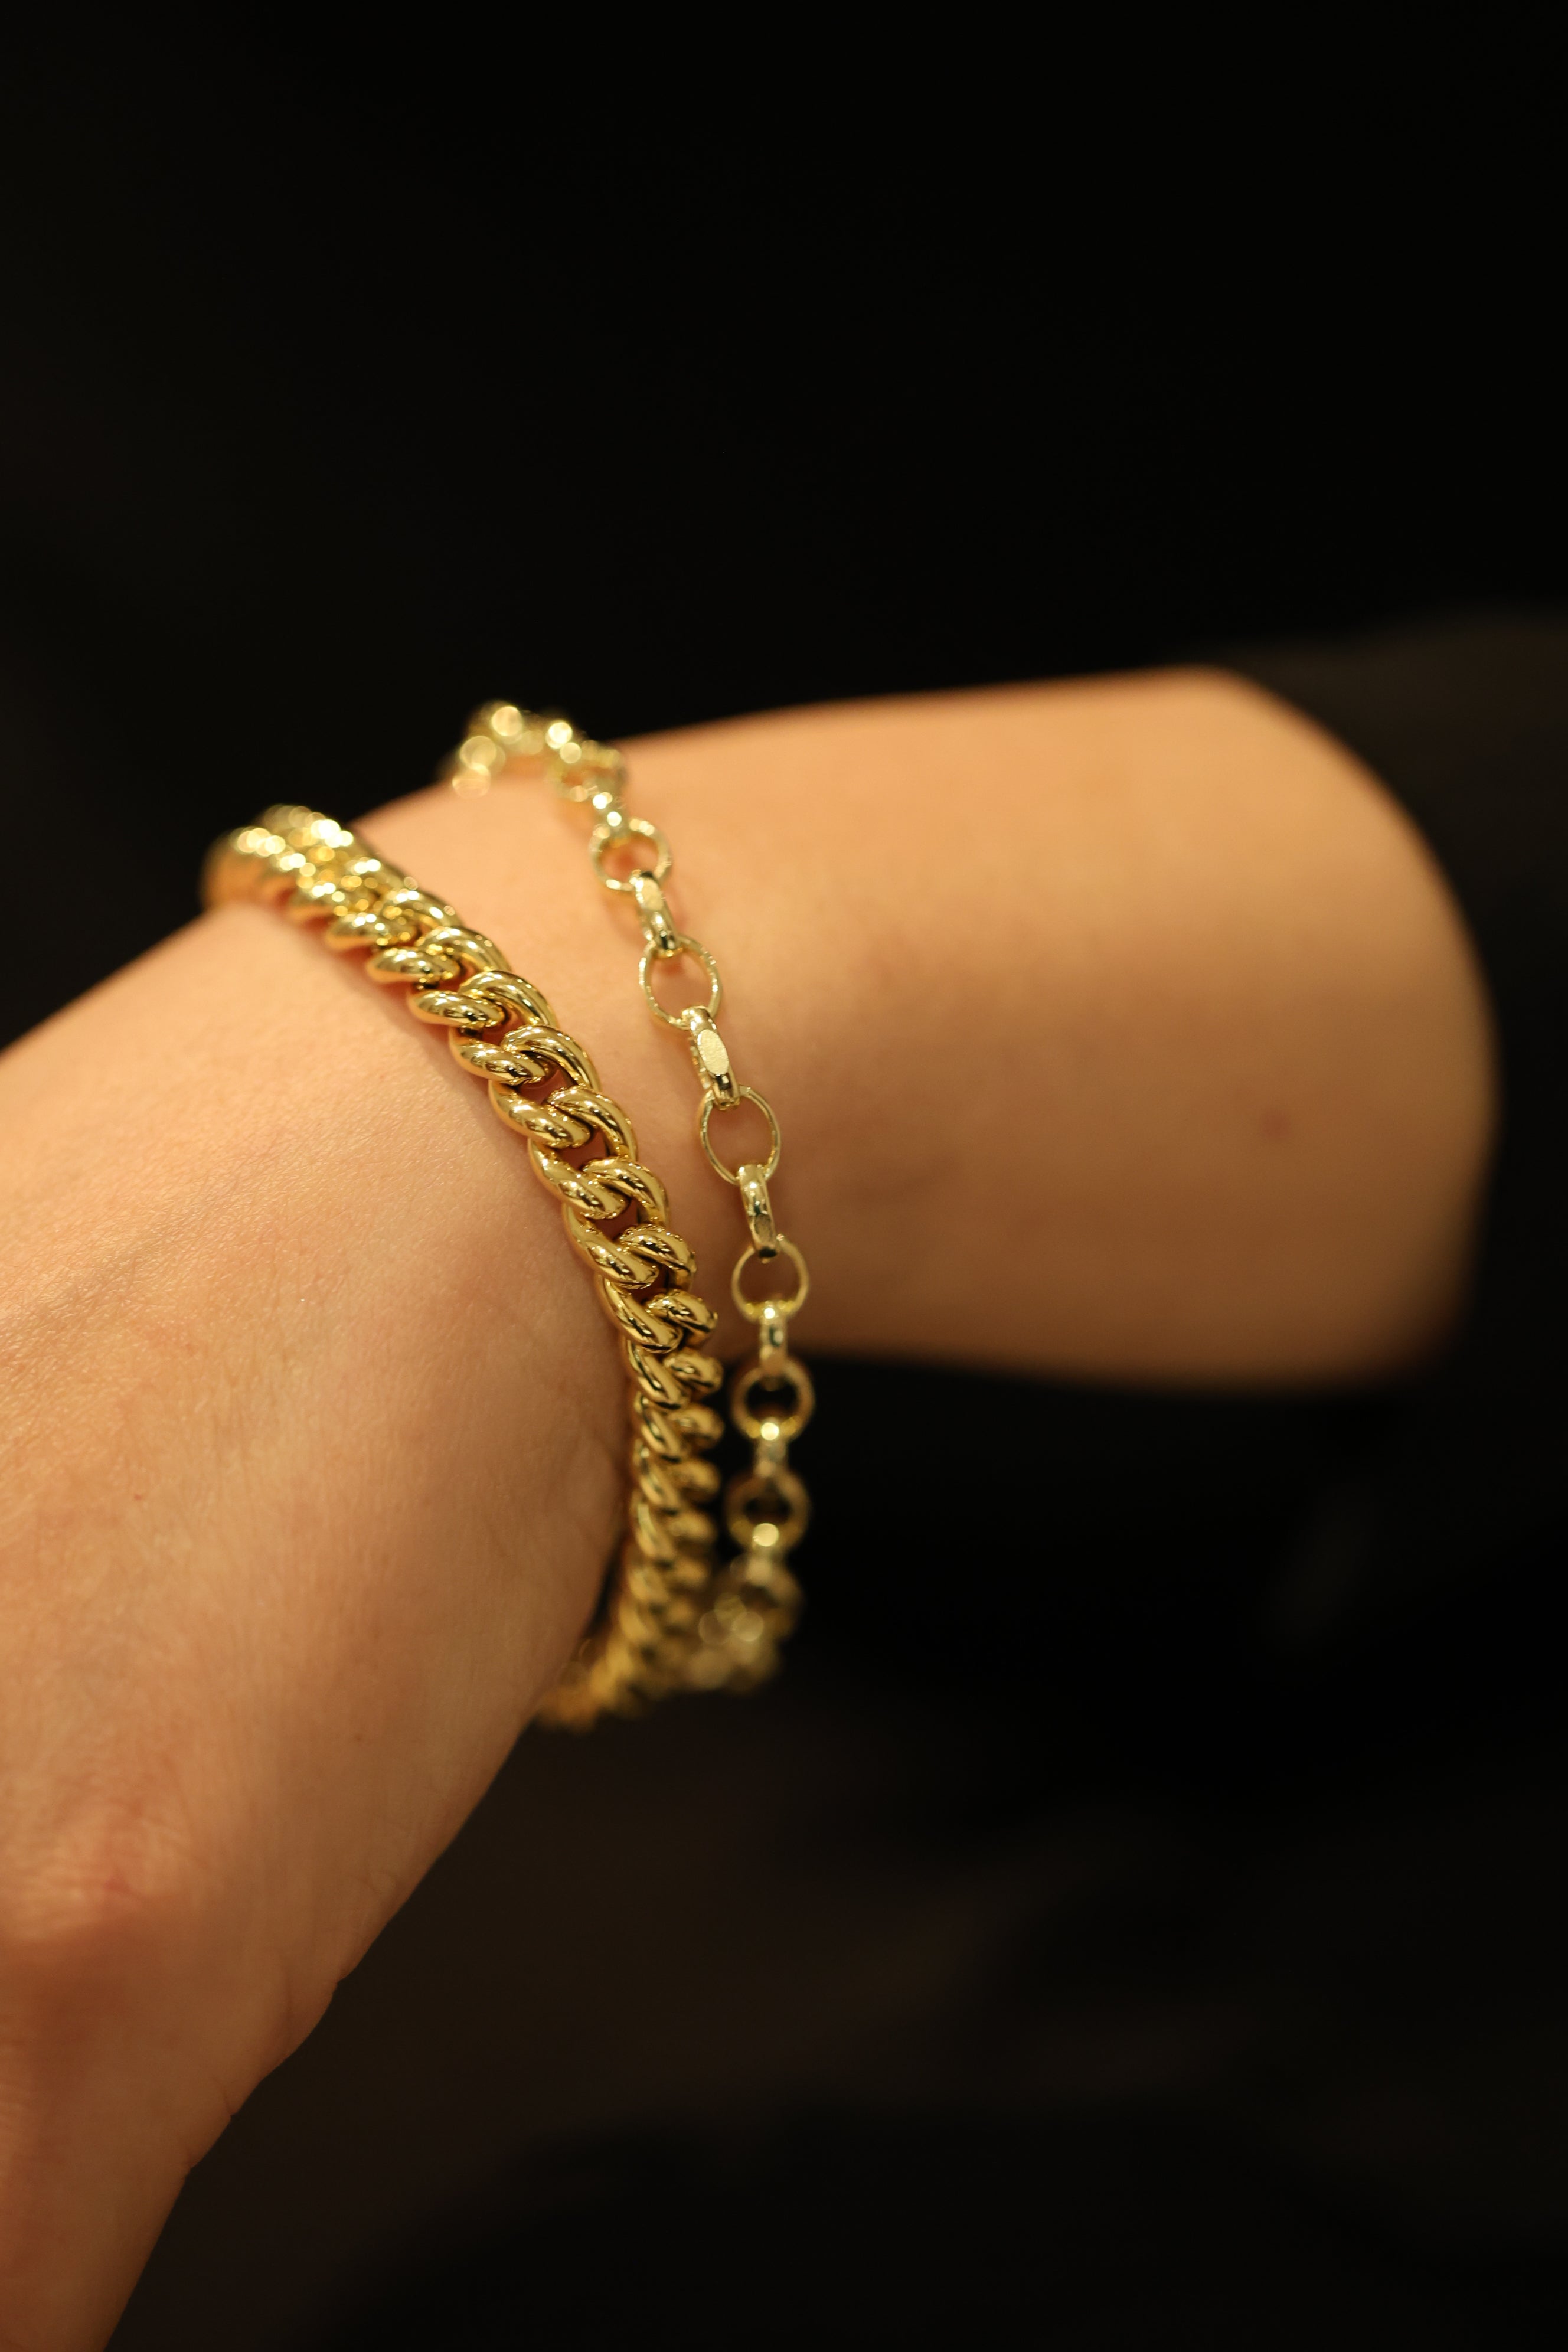 Vintage Heavy 9ct Gold Curb Bracelet - Jewellery & Gold - Hemswell Antique  Centres